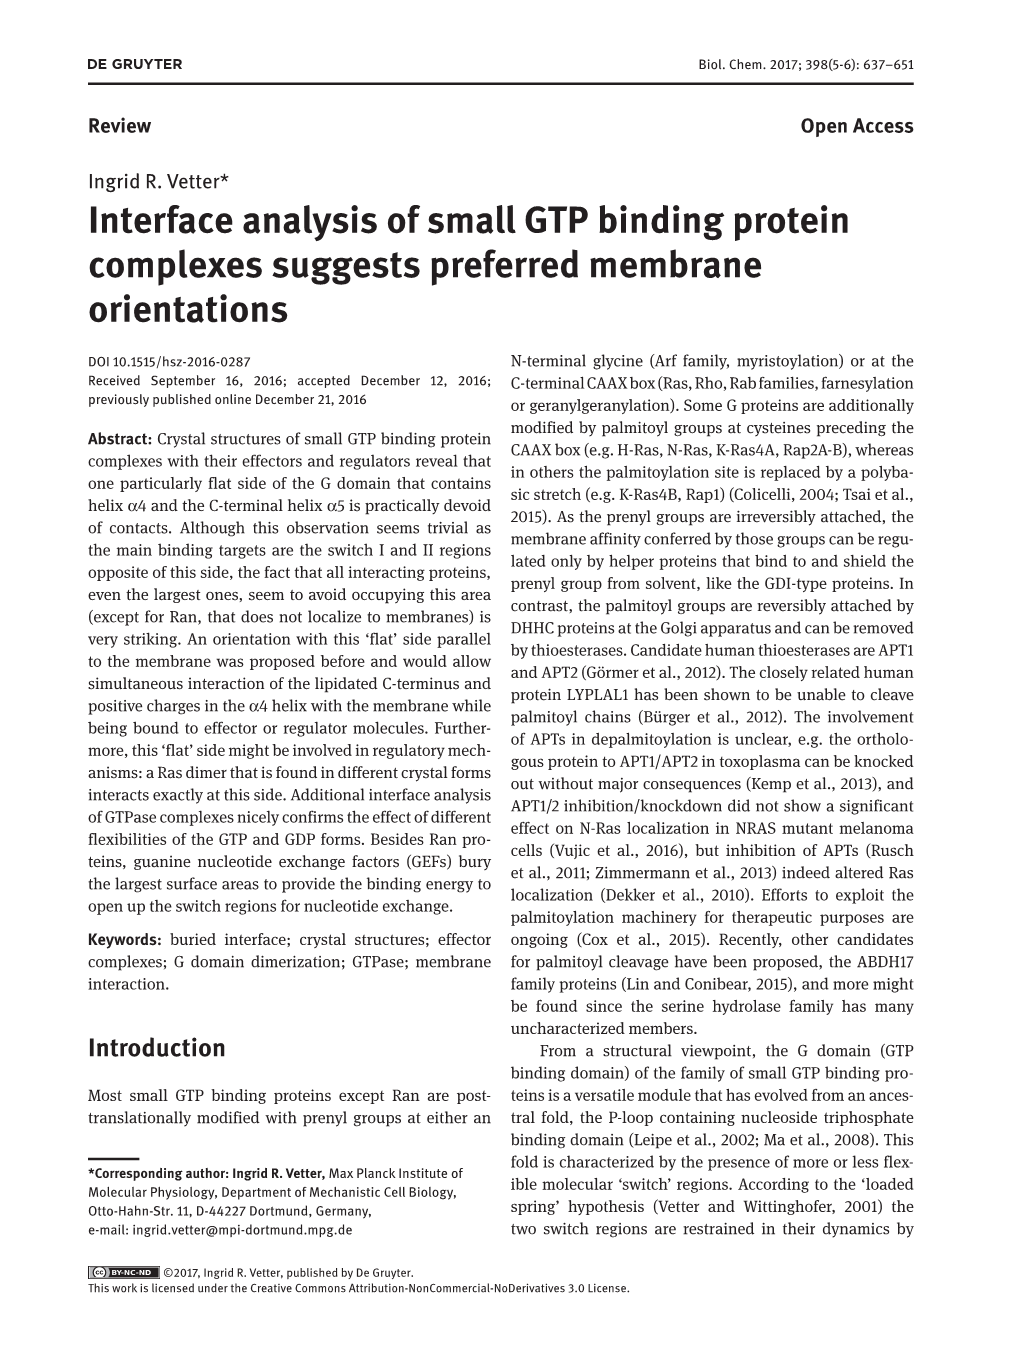 Interface Analysis of Small GTP Binding Protein Complexes Suggests Preferred Membrane Orientations